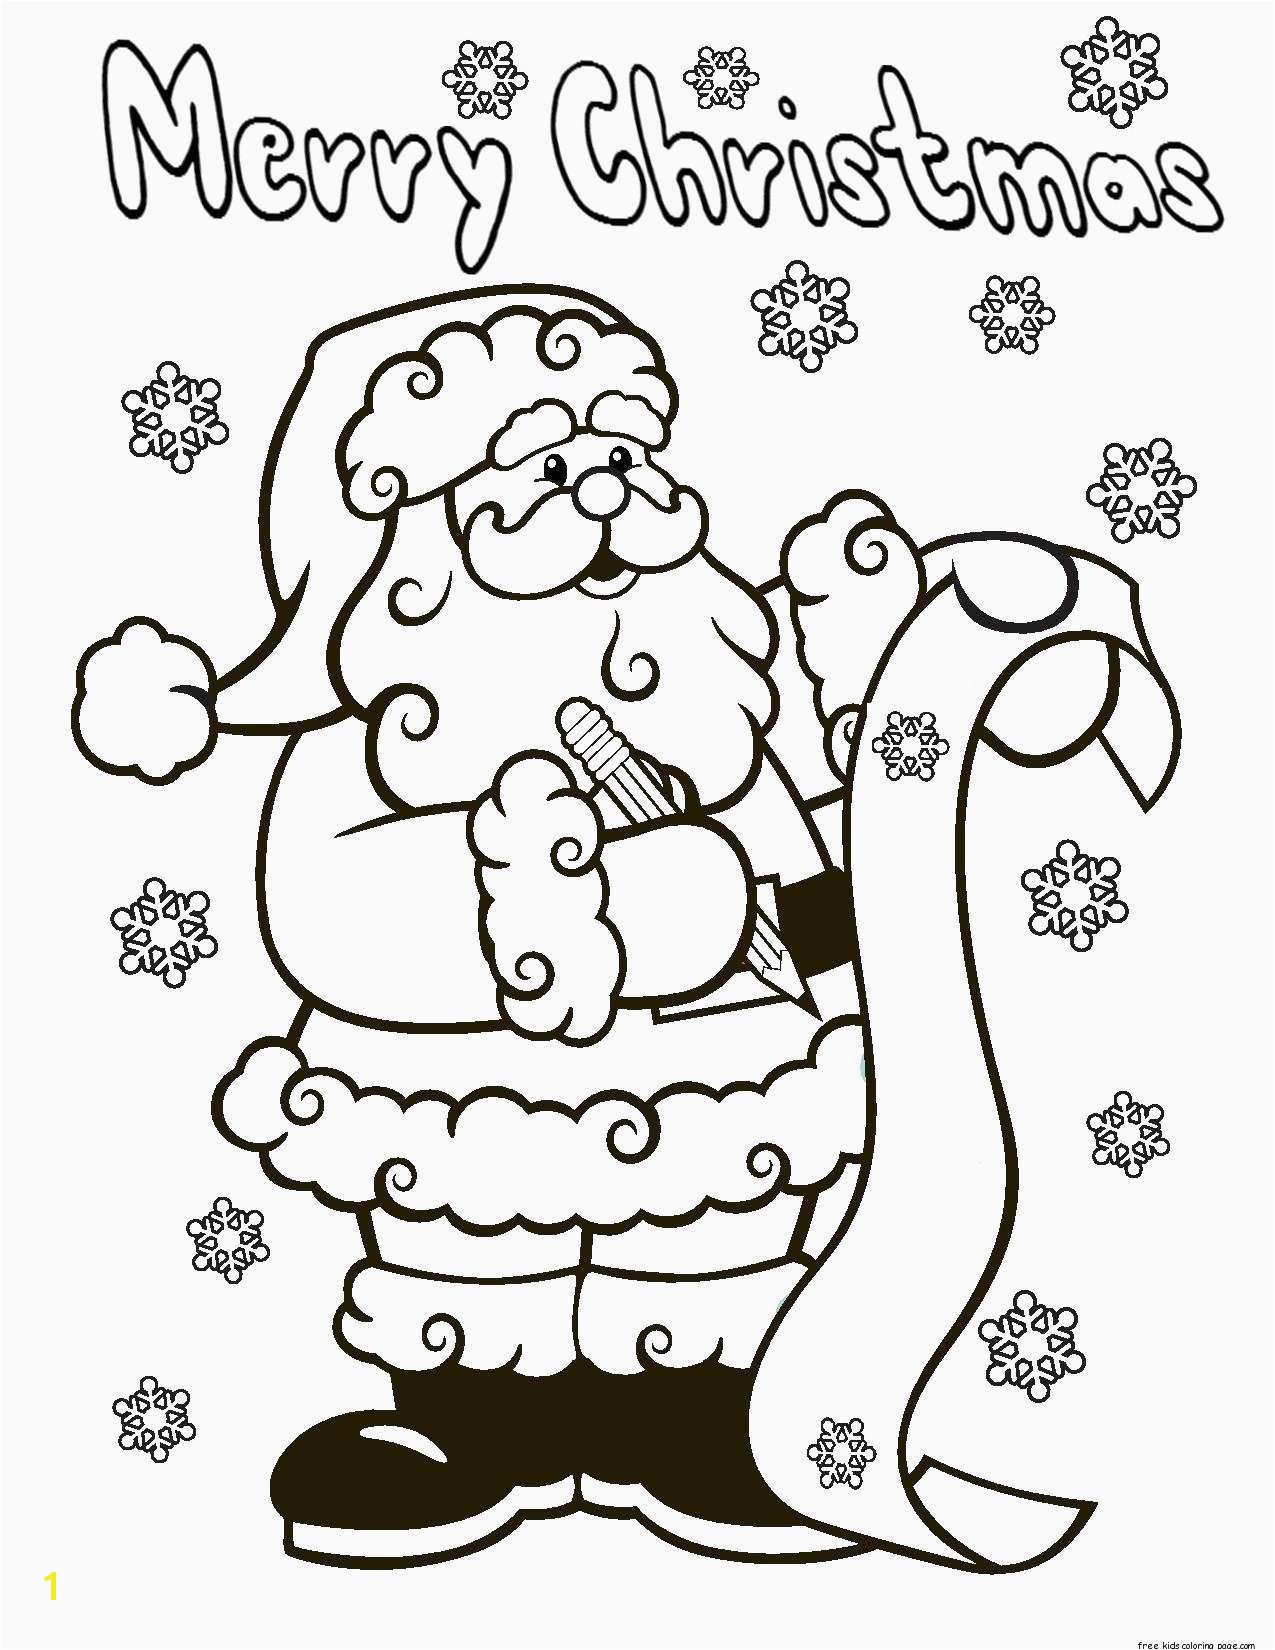 Lego Printable Coloring Pages Free Lego Christmas Coloring Pages Free Christmas Color Pages